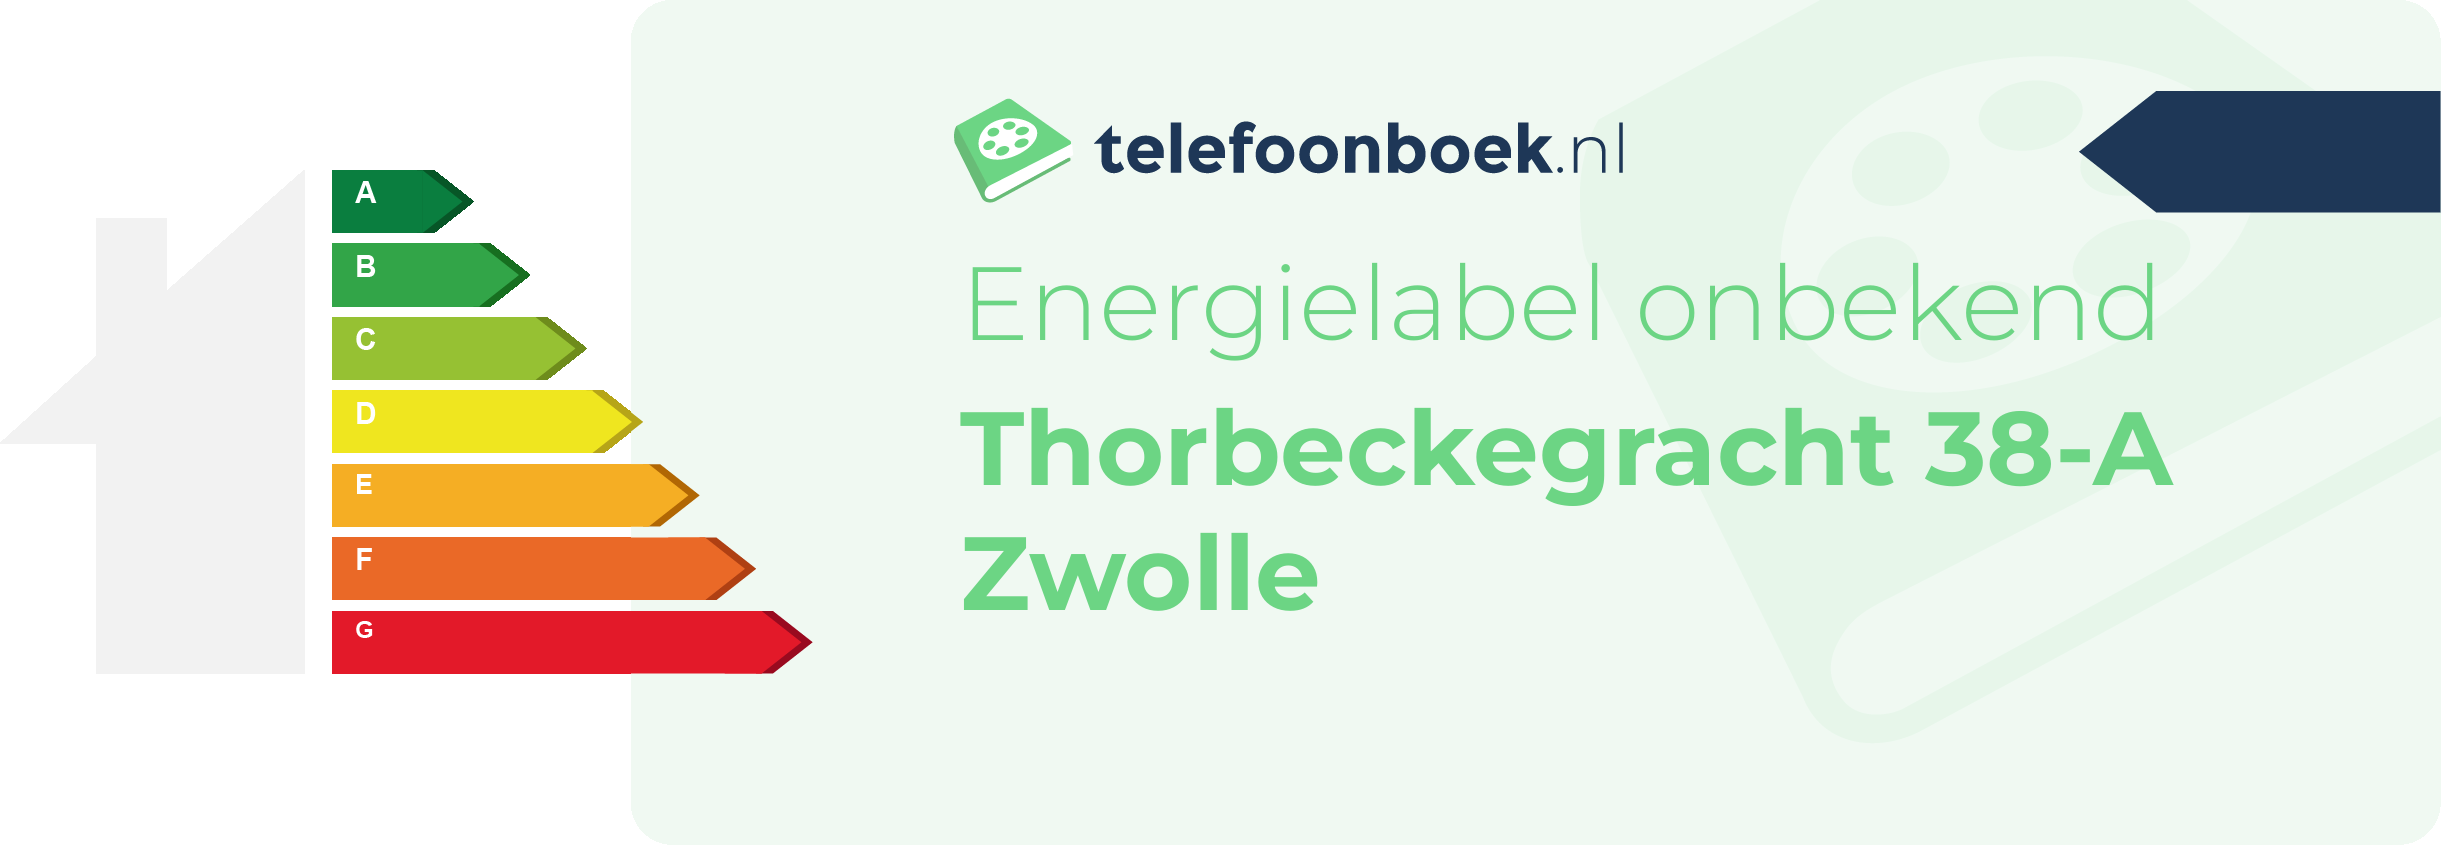 Energielabel Thorbeckegracht 38-A Zwolle